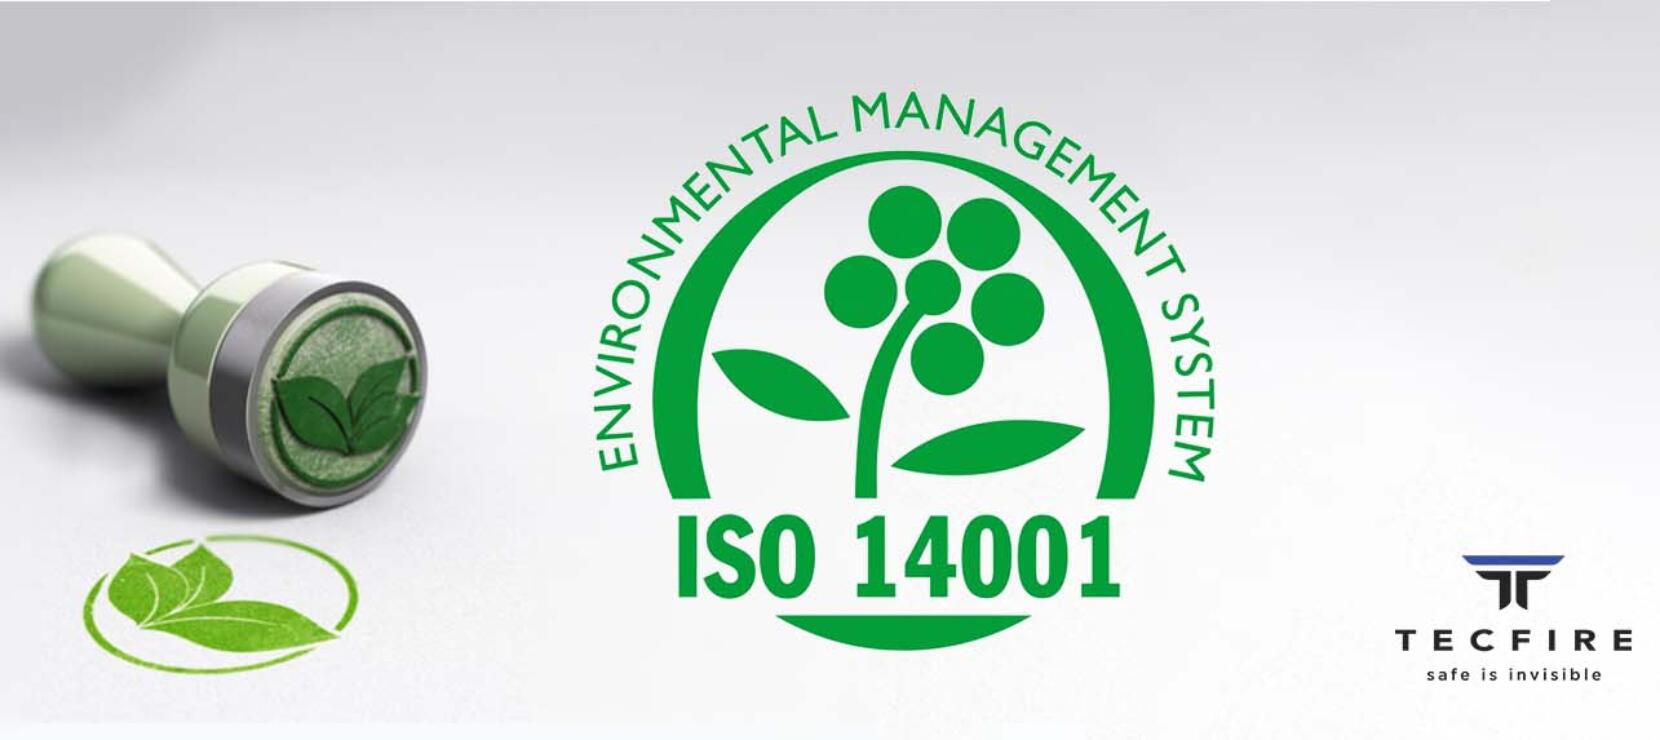 New Environmental Management Certification ISO 14001